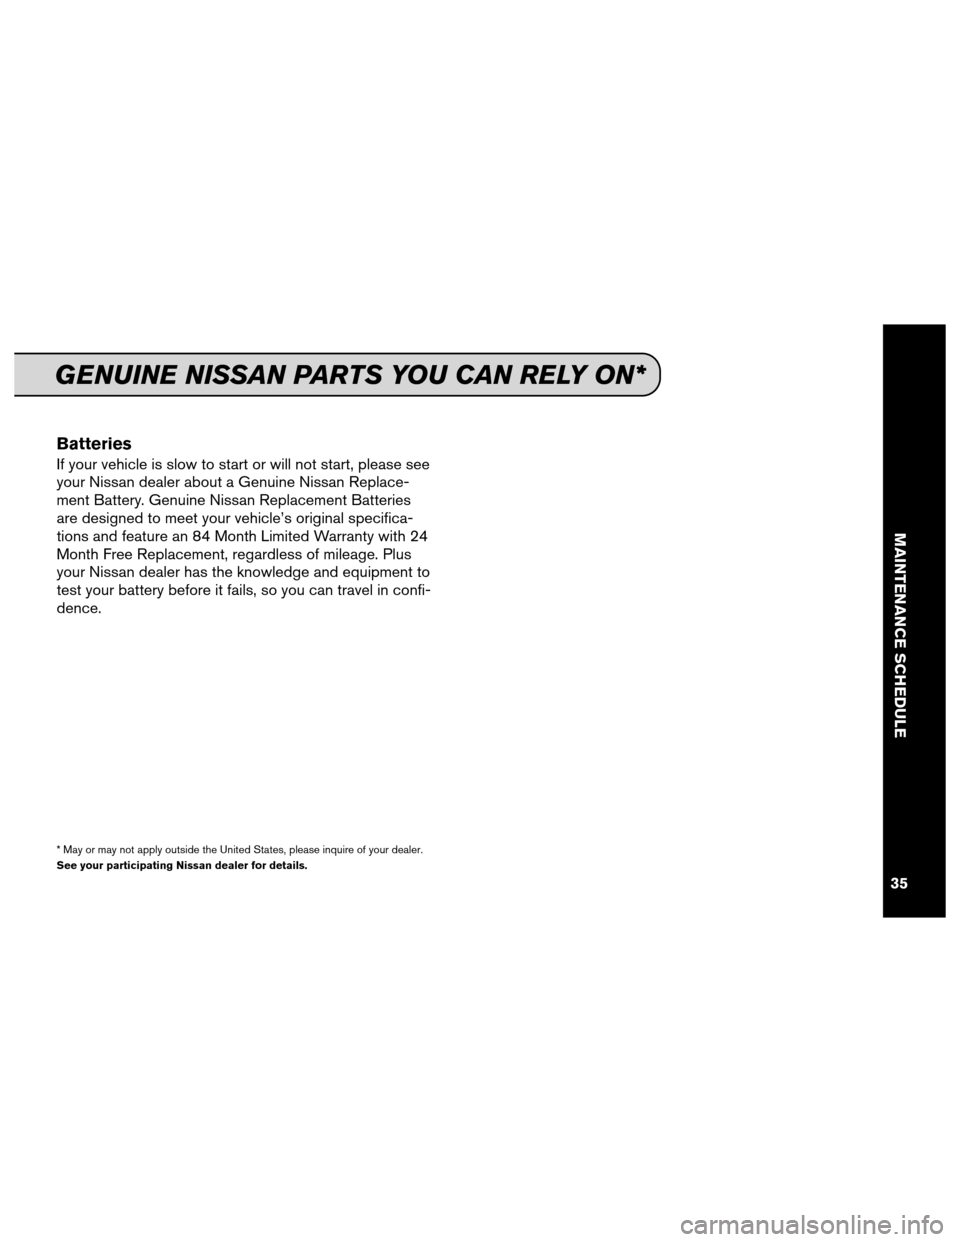 NISSAN QUEST 2013 RE52 / 4.G Service And Maintenance Guide Batteries
If your vehicle is slow to start or will not start, please see
your Nissan dealer about a Genuine Nissan Replace-
ment Battery. Genuine Nissan Replacement Batteries
are designed to meet your